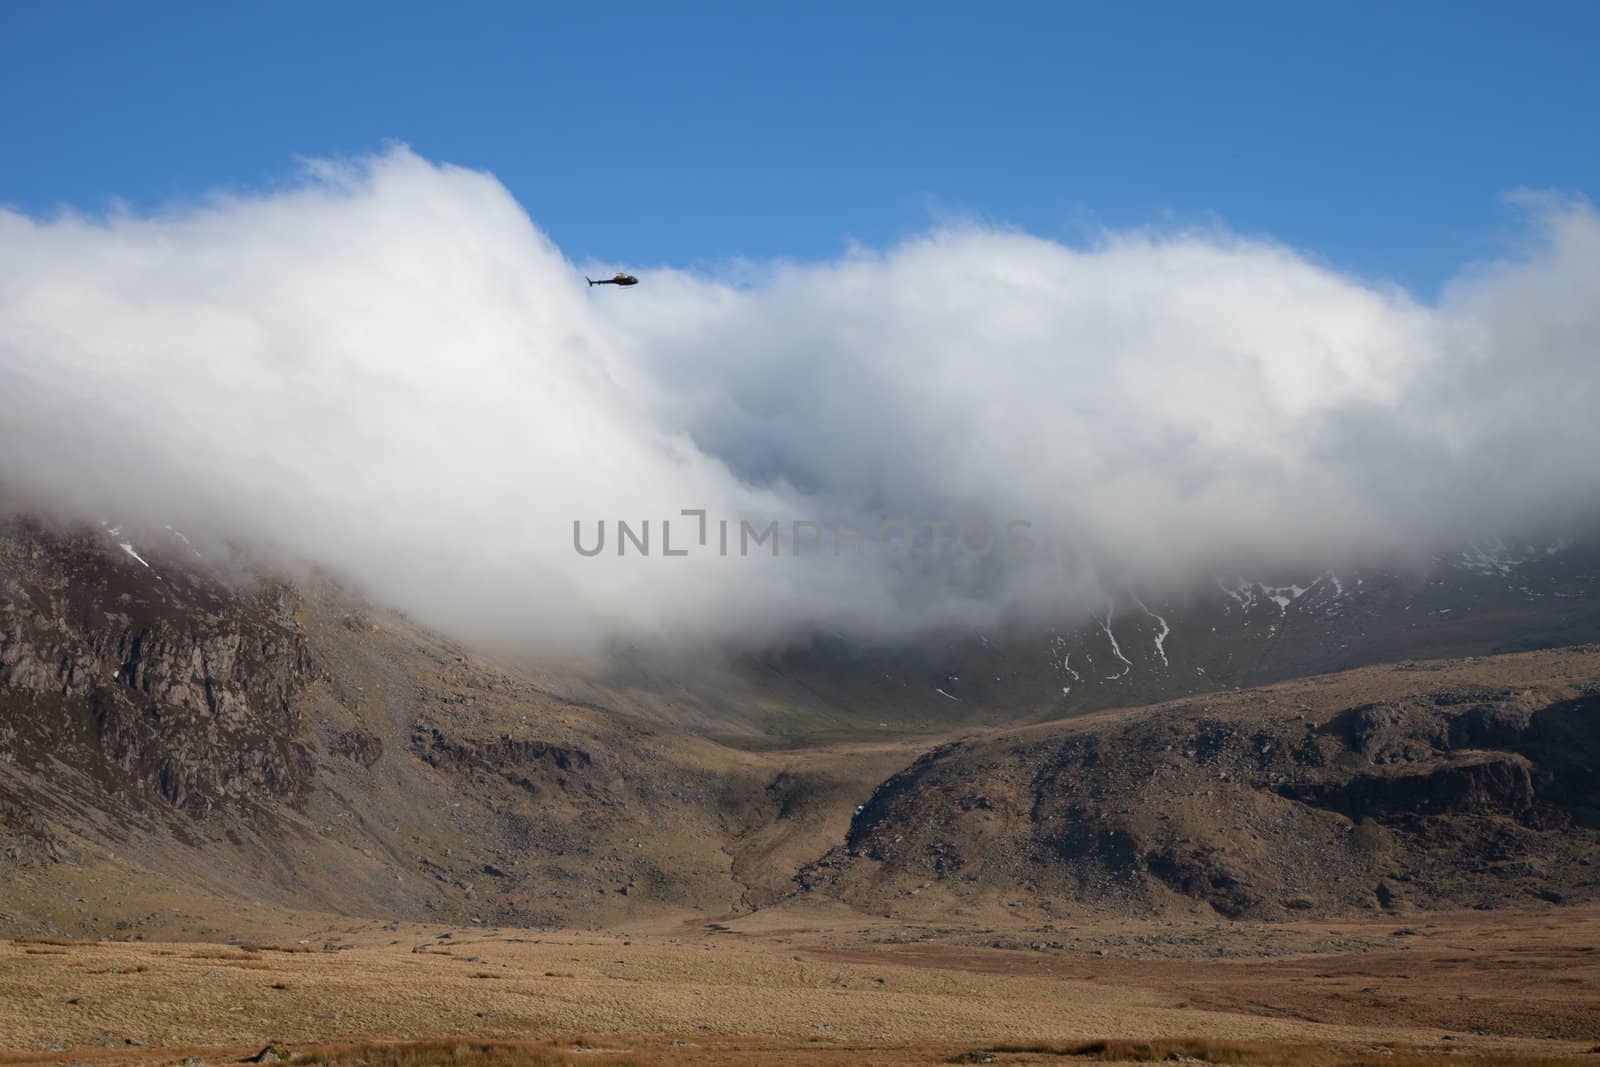 A helecopter patrols over a developing cloud inversion over a mountain peak.